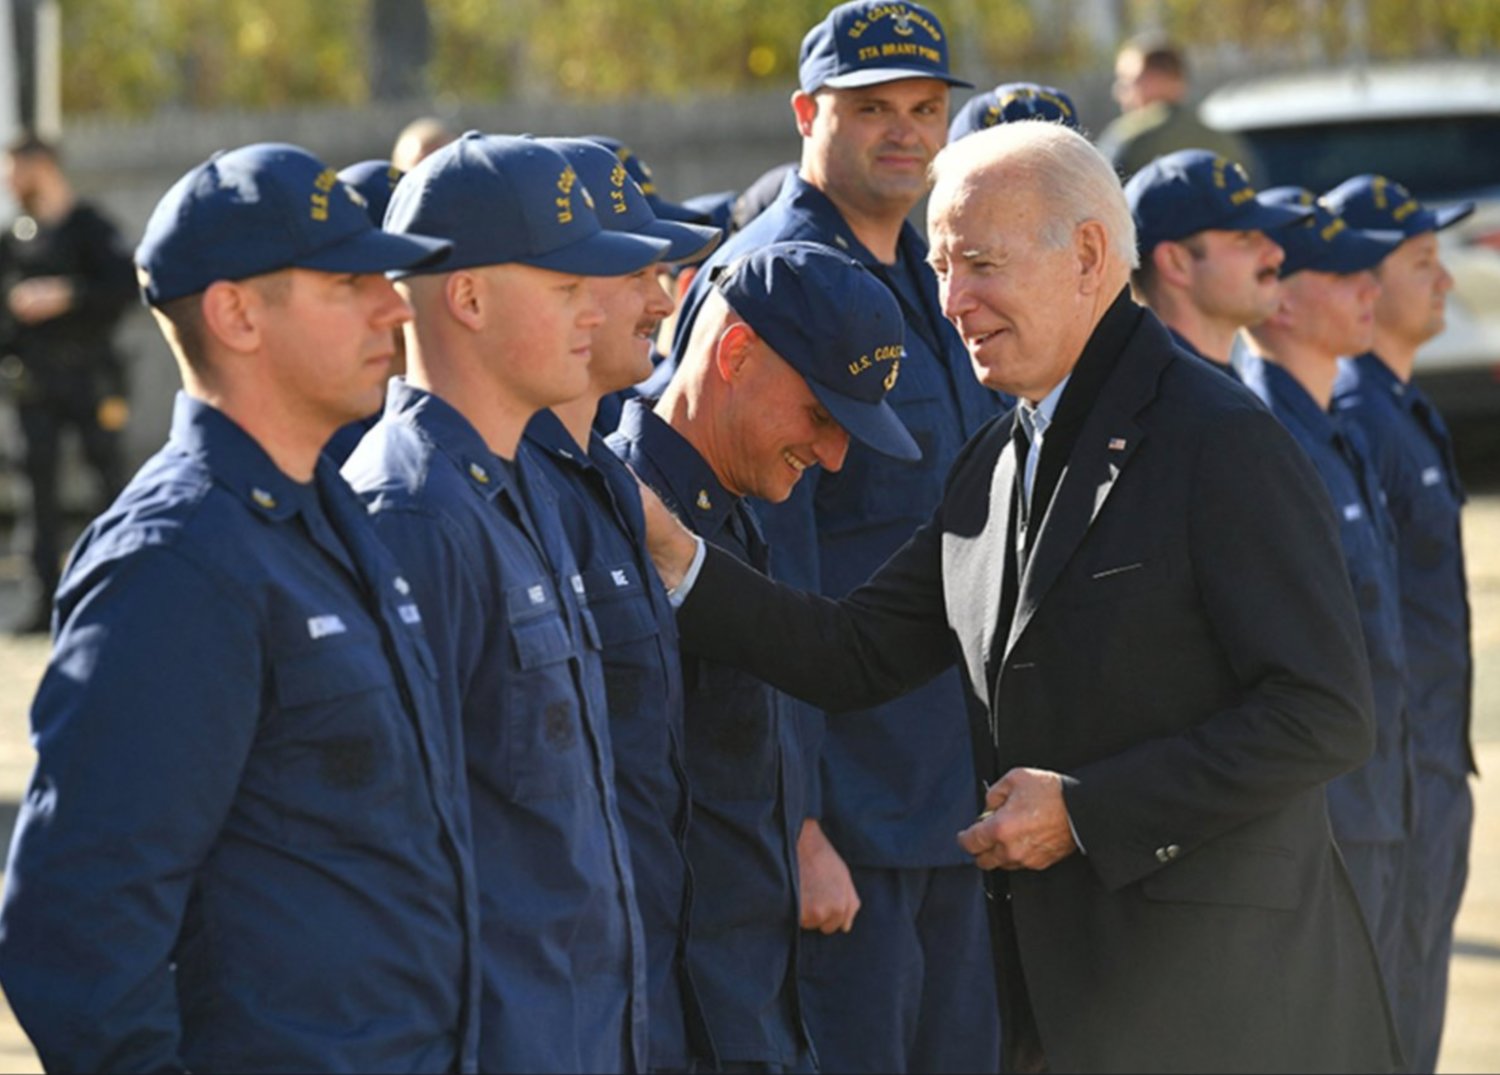 President Joe Biden visits with members of Coast Guard Station Brant Point on Thanksgiving morning last year.